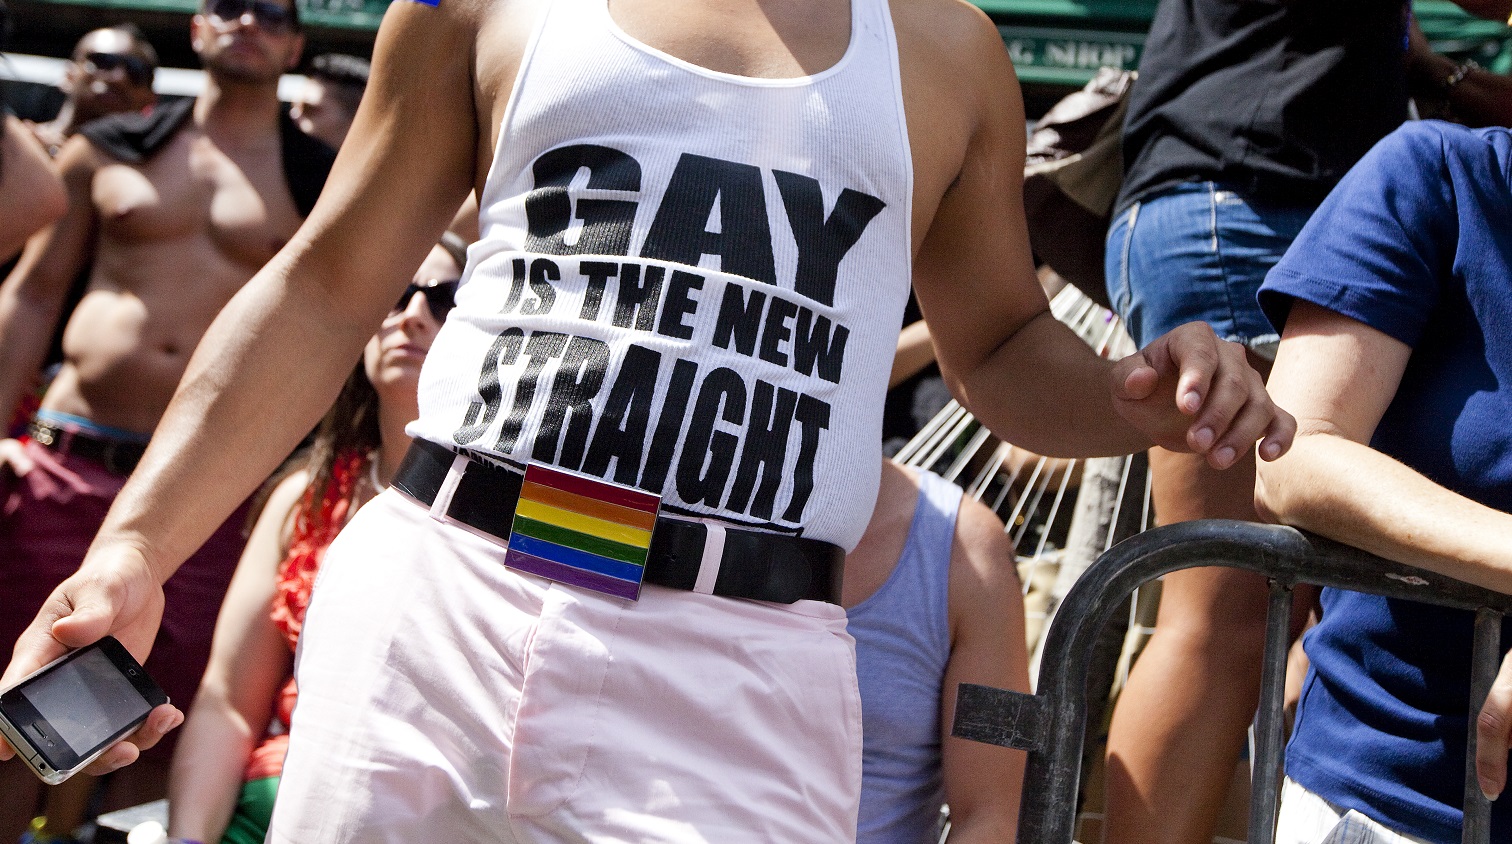 File photo of a man at an LGBT+ Pride parade in New York.